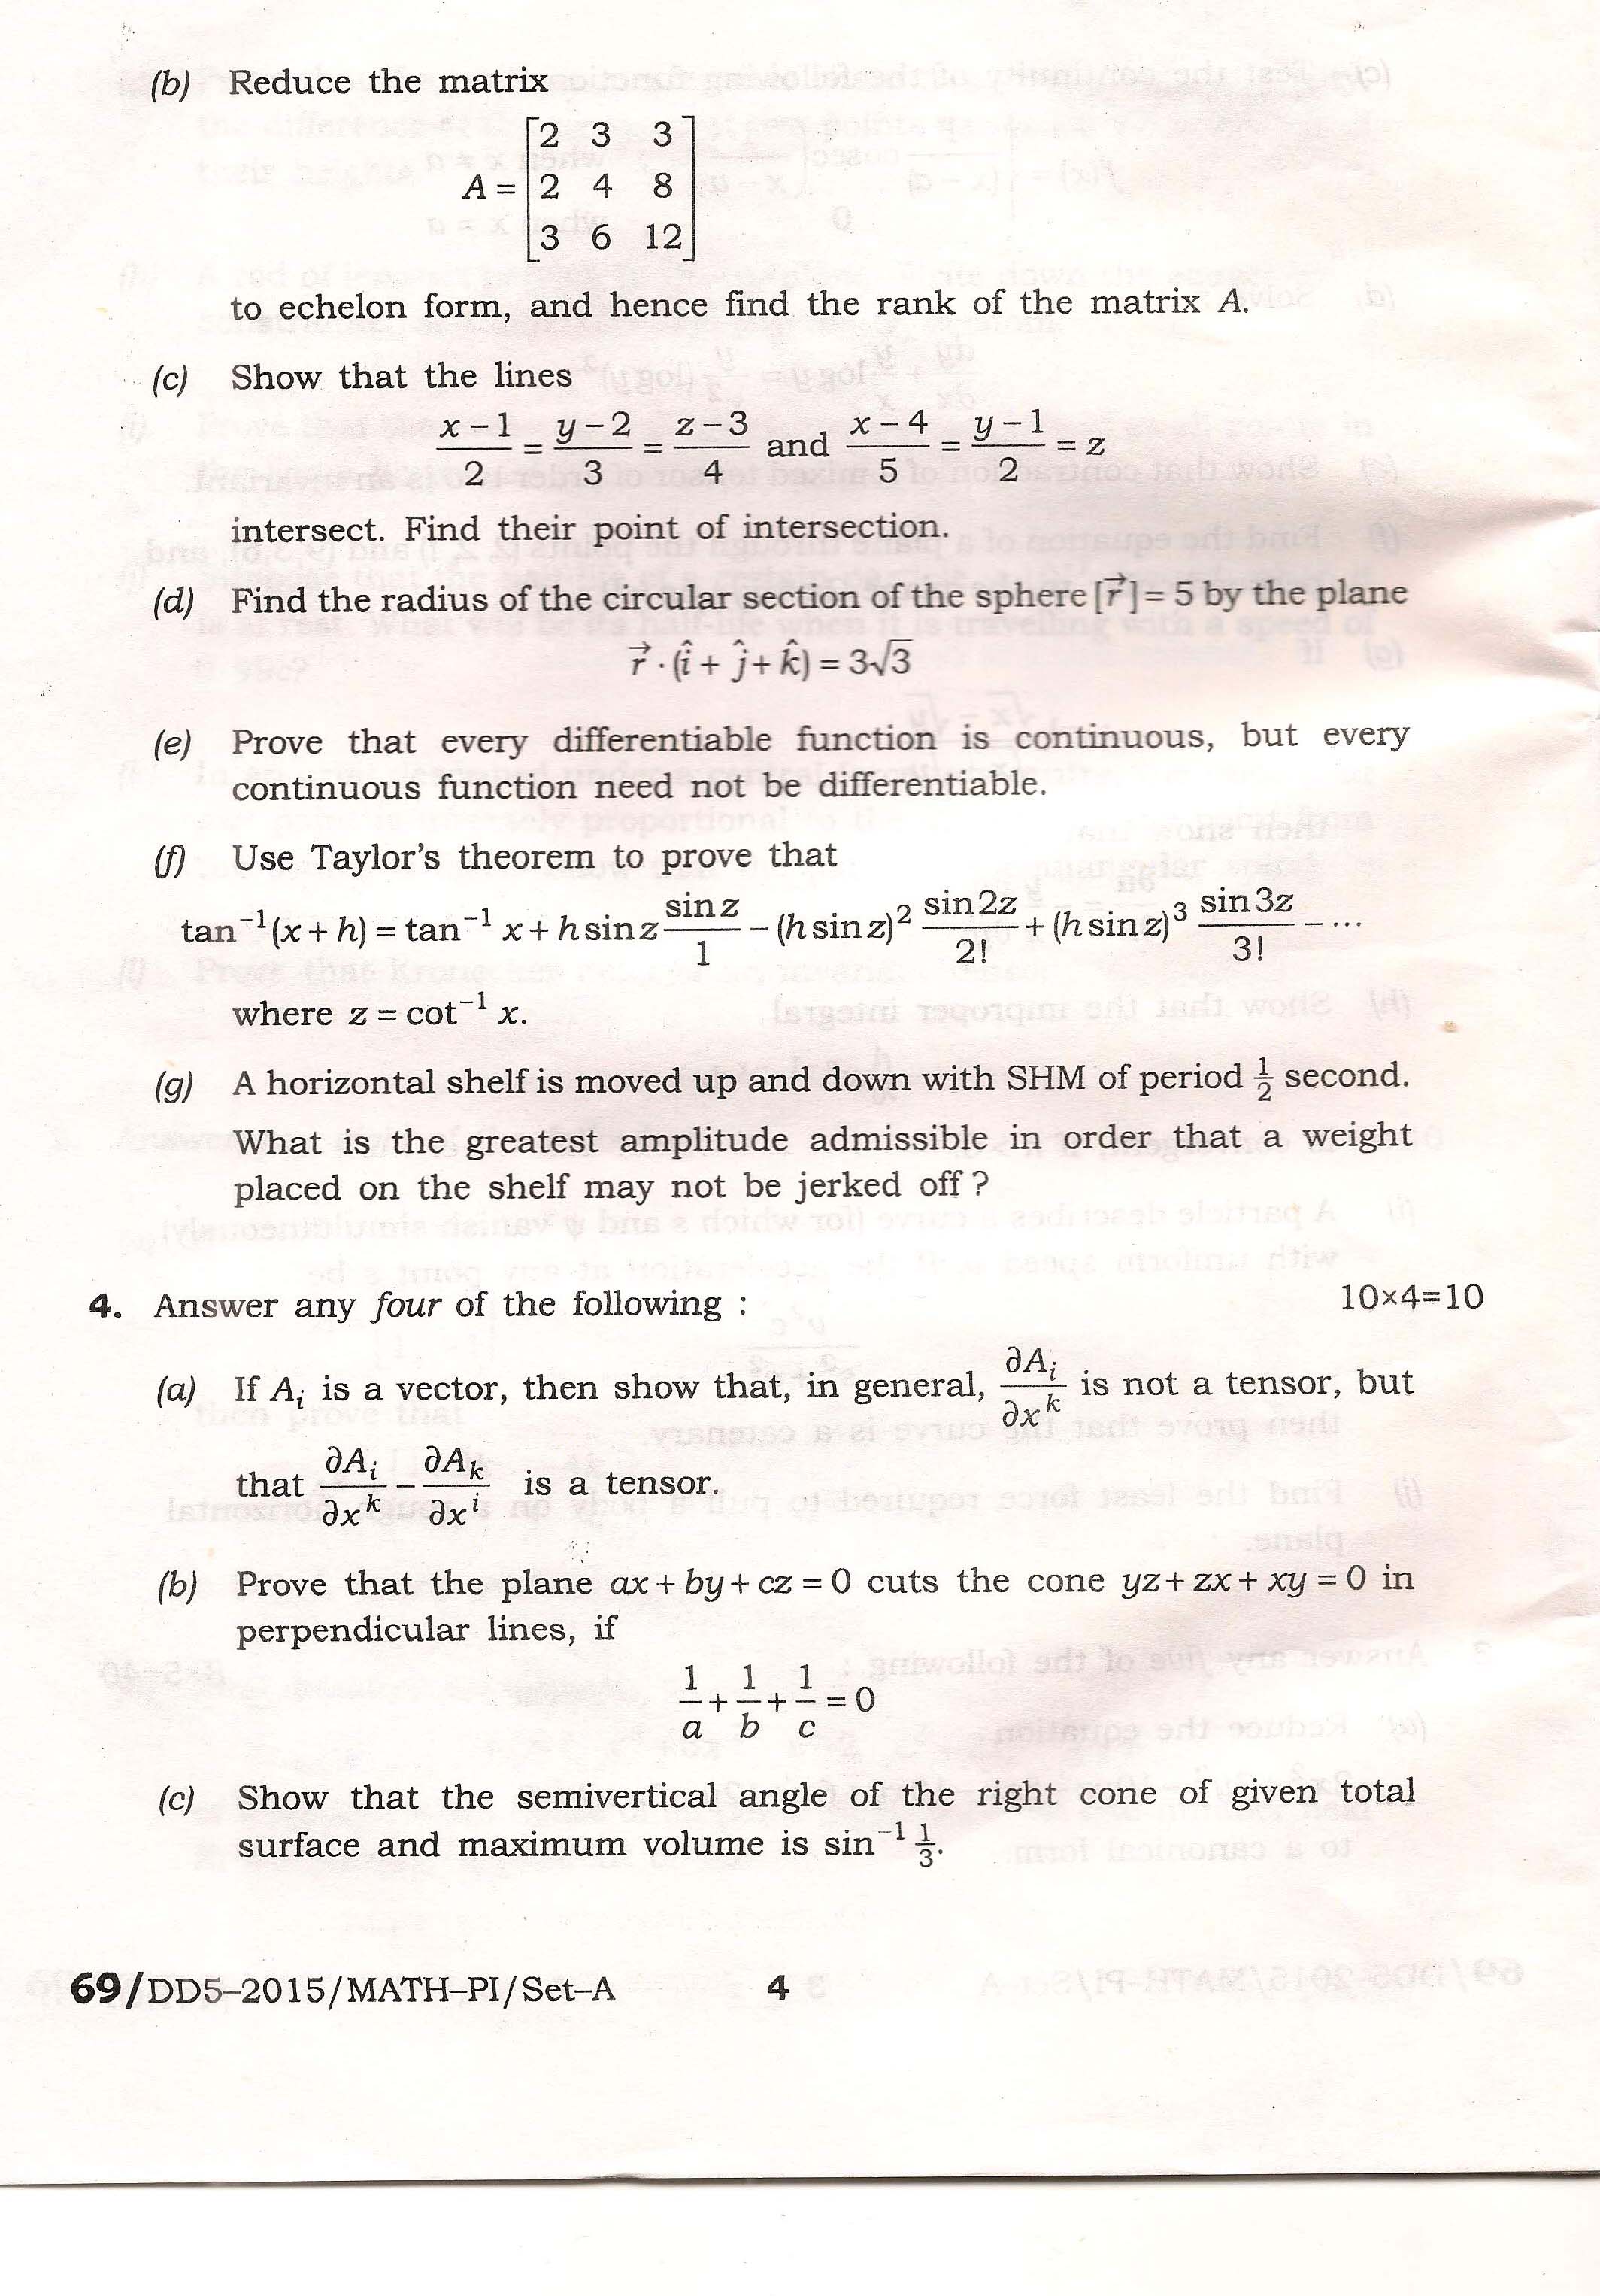 APPSC Combined Competitive Main Exam 2015 Mathematics Paper I 4